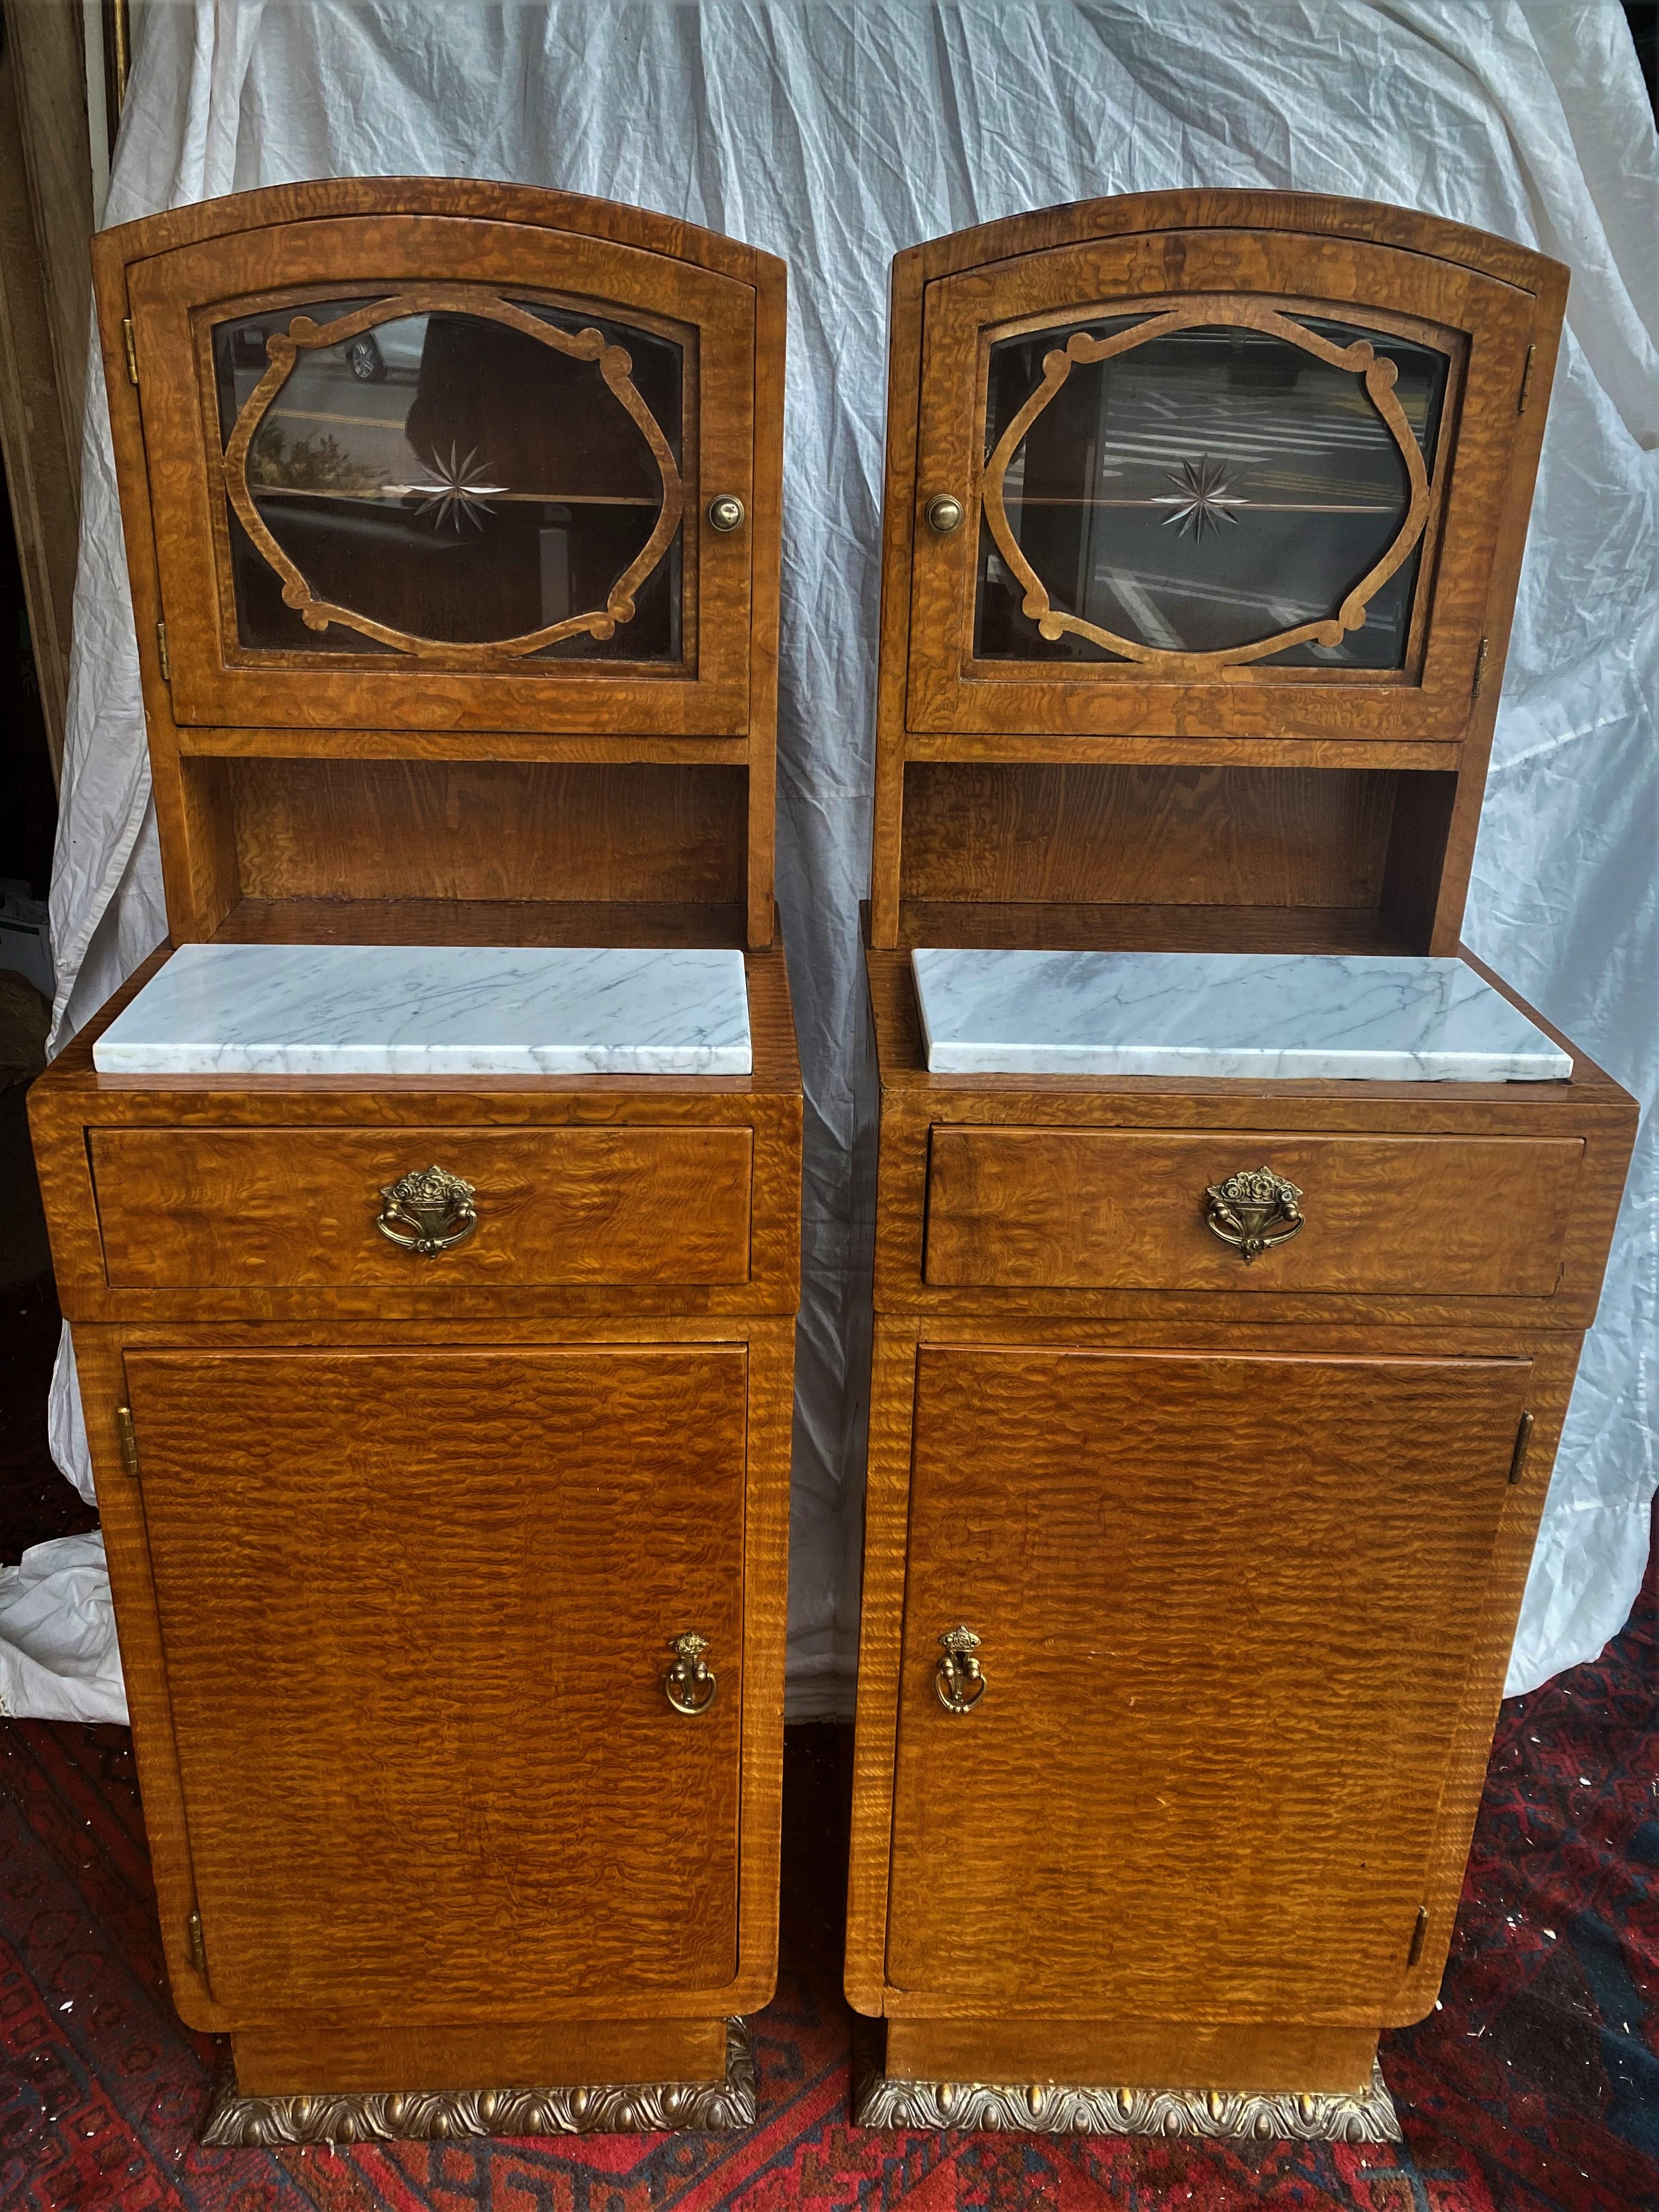 These are the sweetest pair of side tables with a lovely burled wood finish and brass tone cast metal hardware with floral decoration. The top section has glass front doors with etched stars at centers and wood overlay decoration which opens to